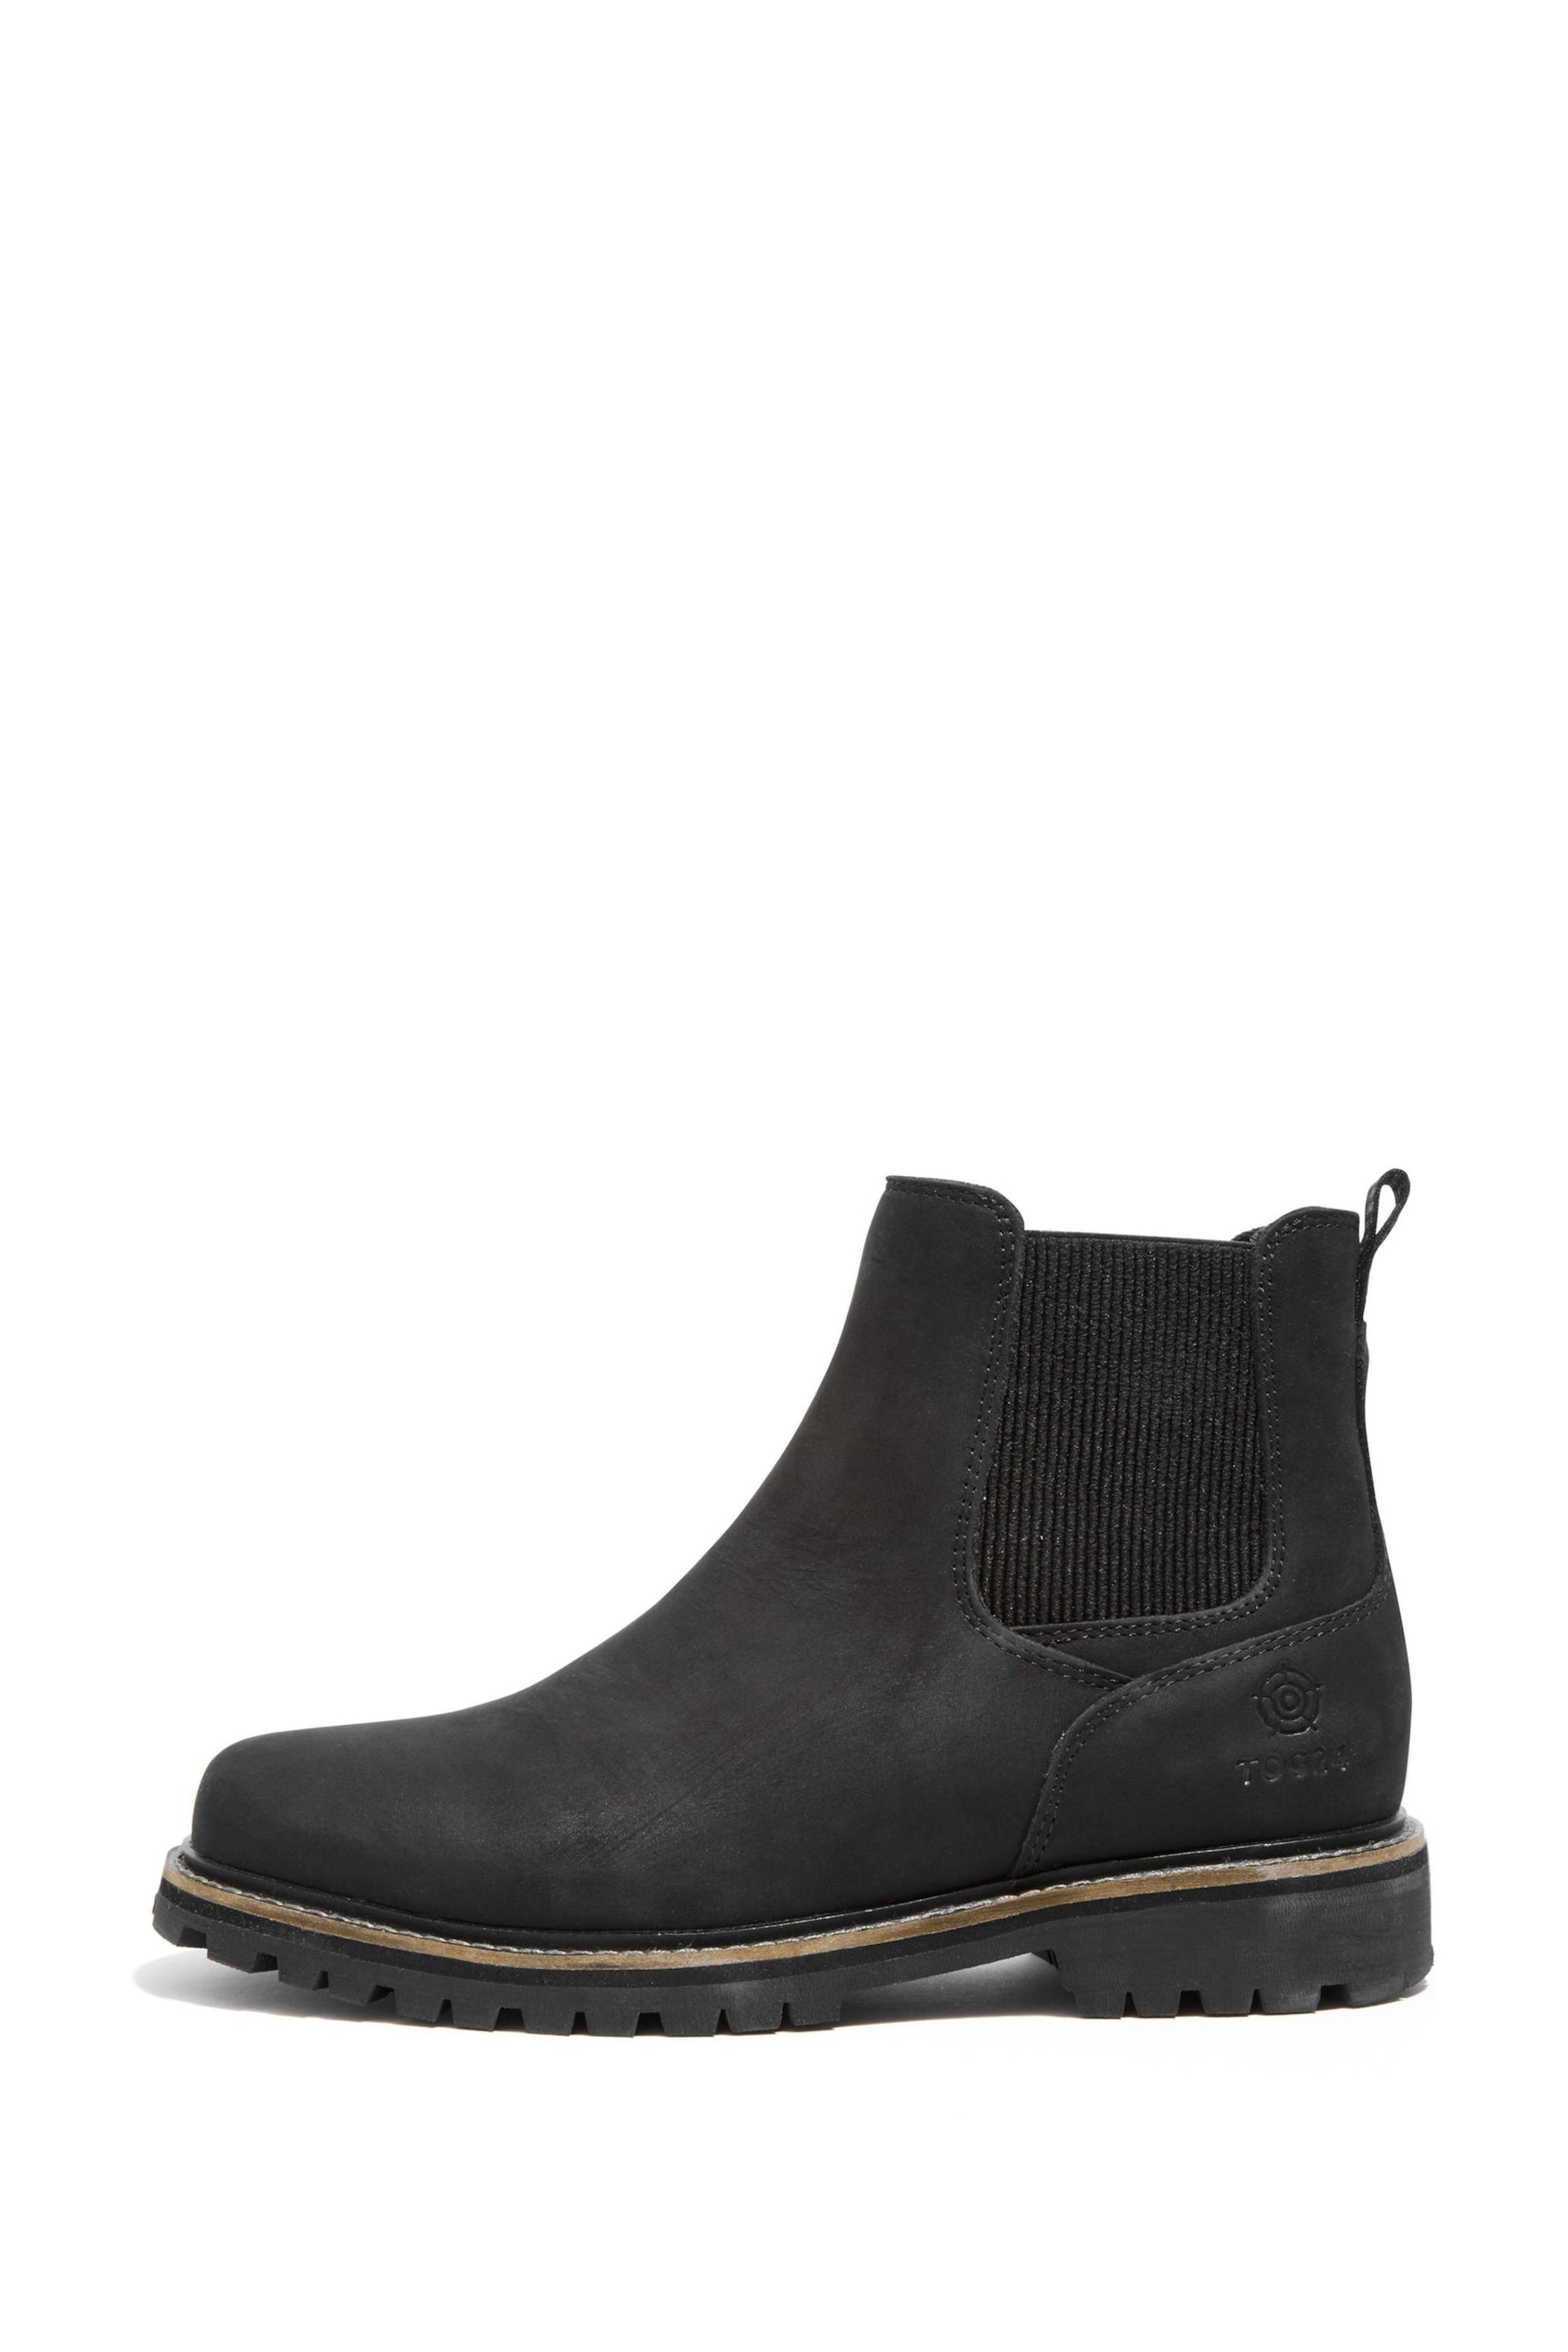 Tog 24 Black Canyon Chelsea Boots - Image 2 of 7